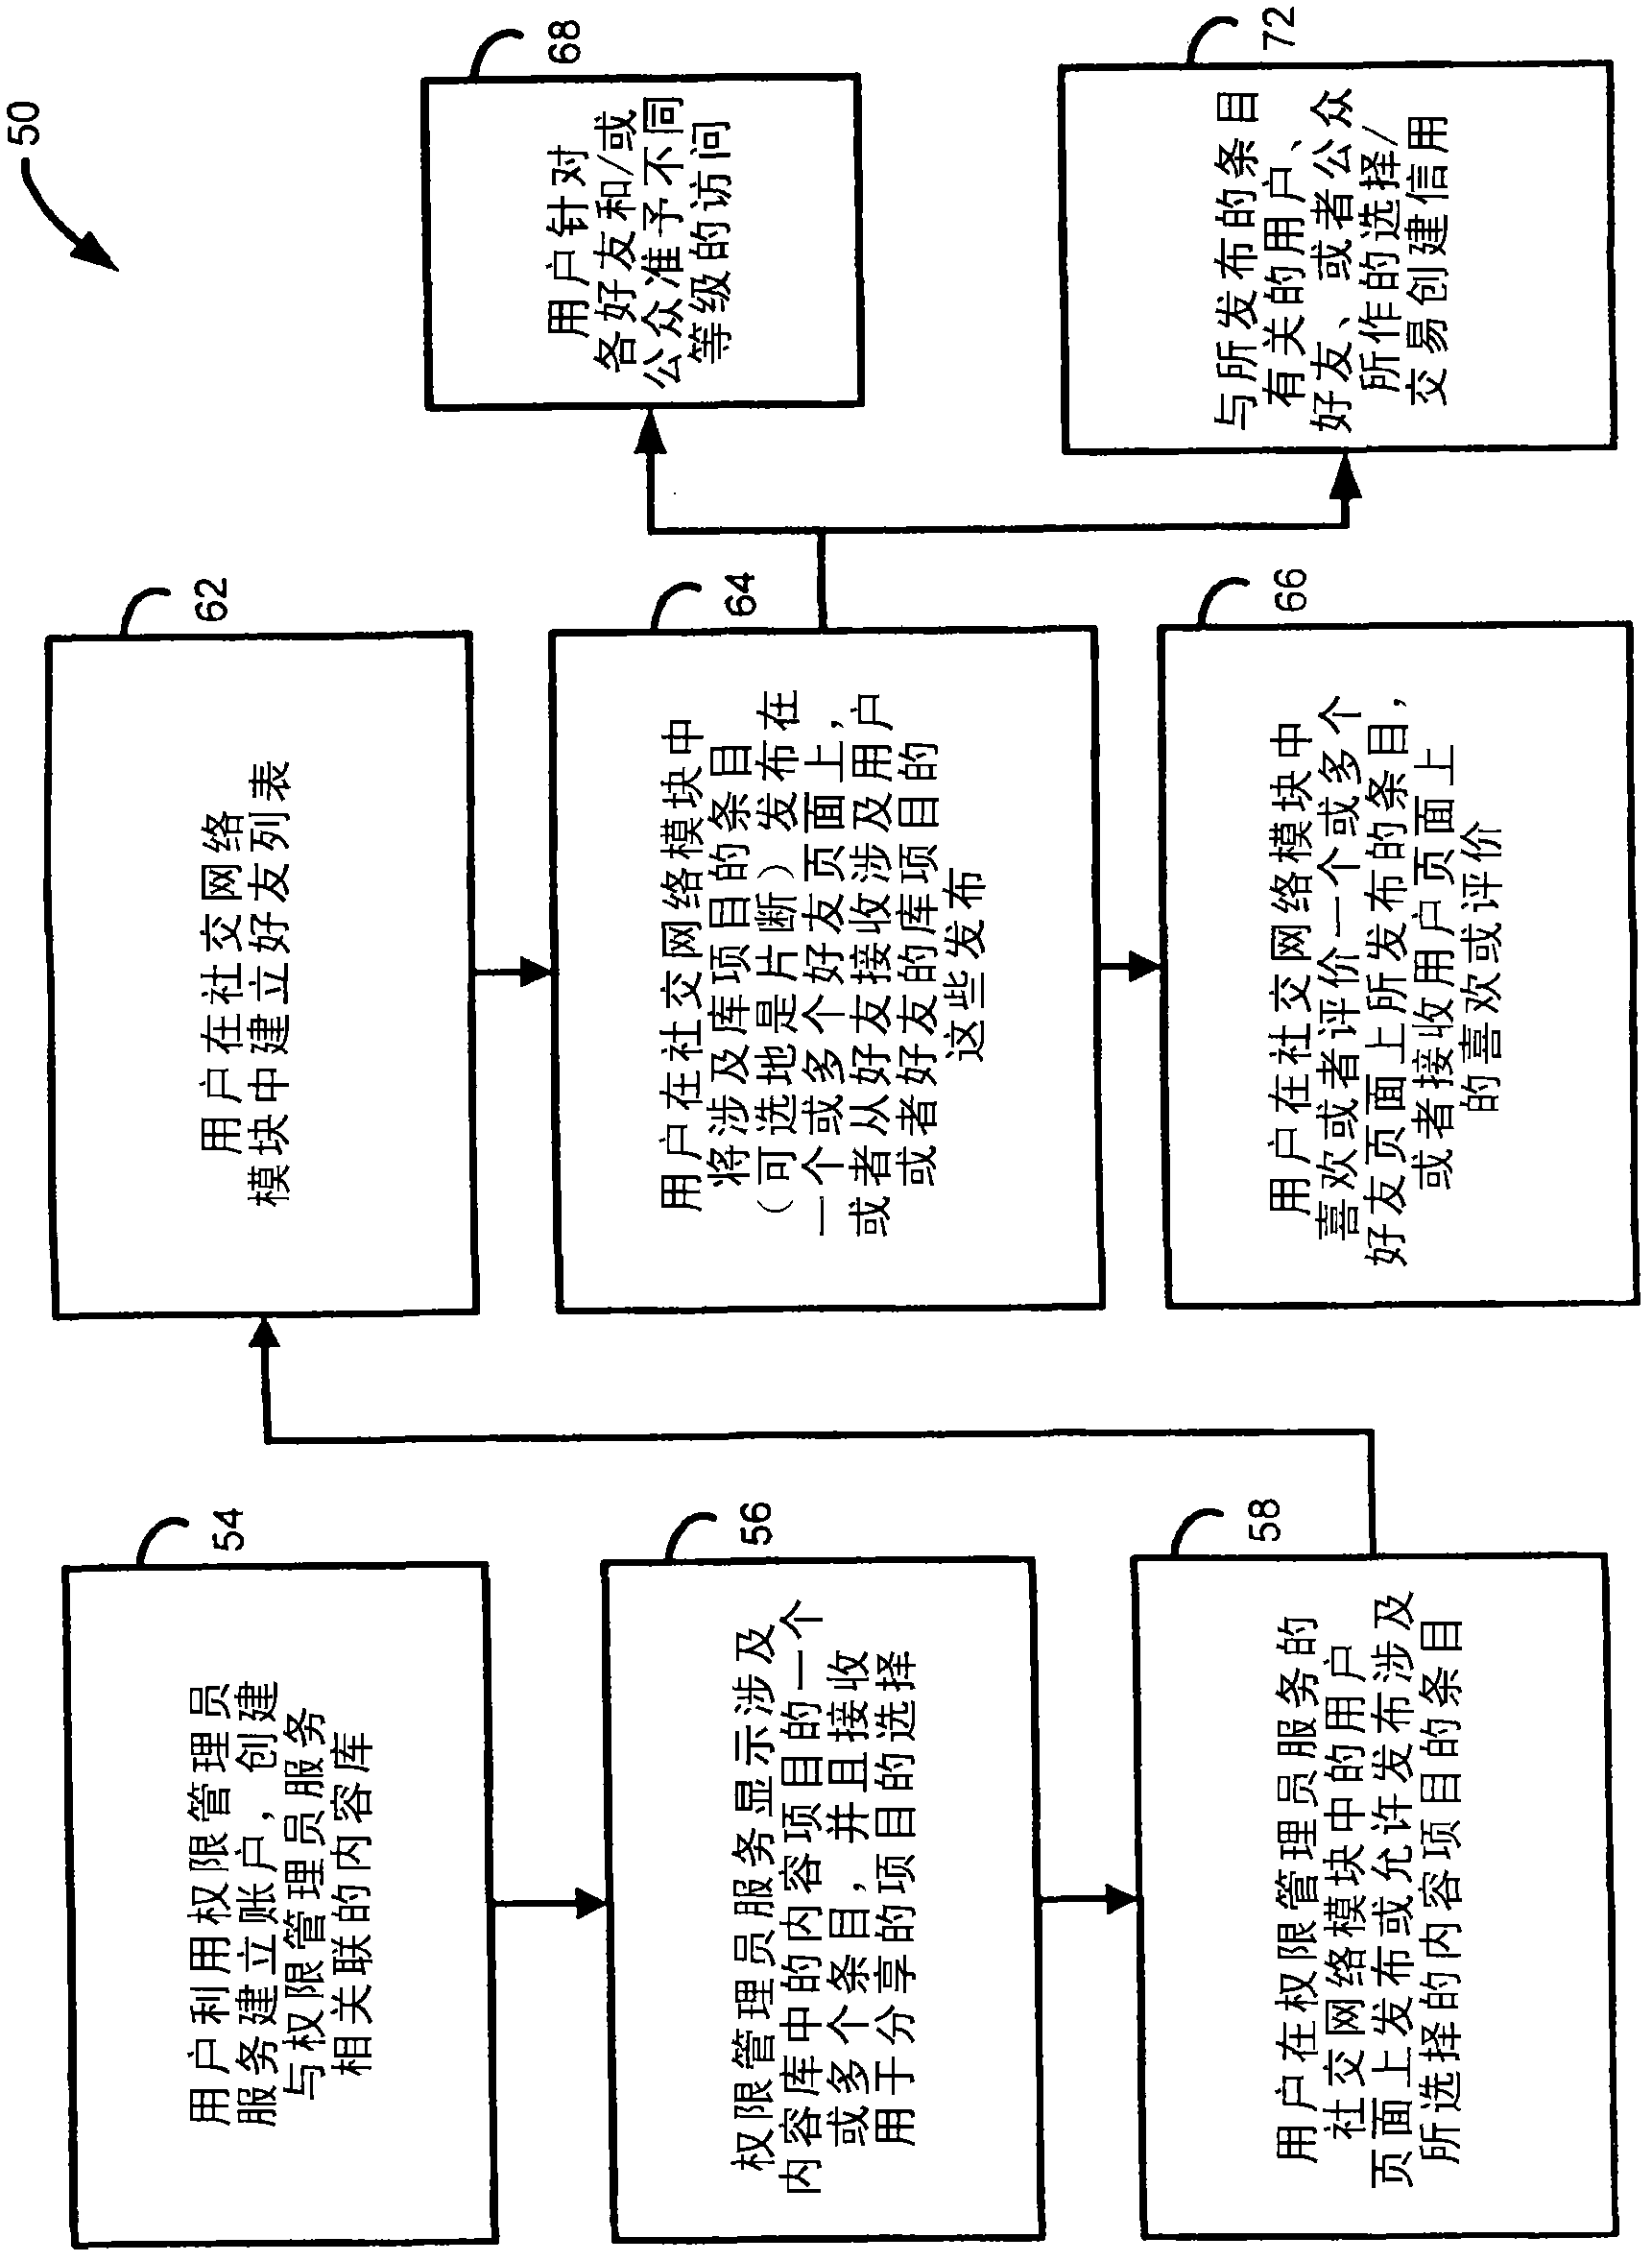 System and method for social interaction about content items such as movies